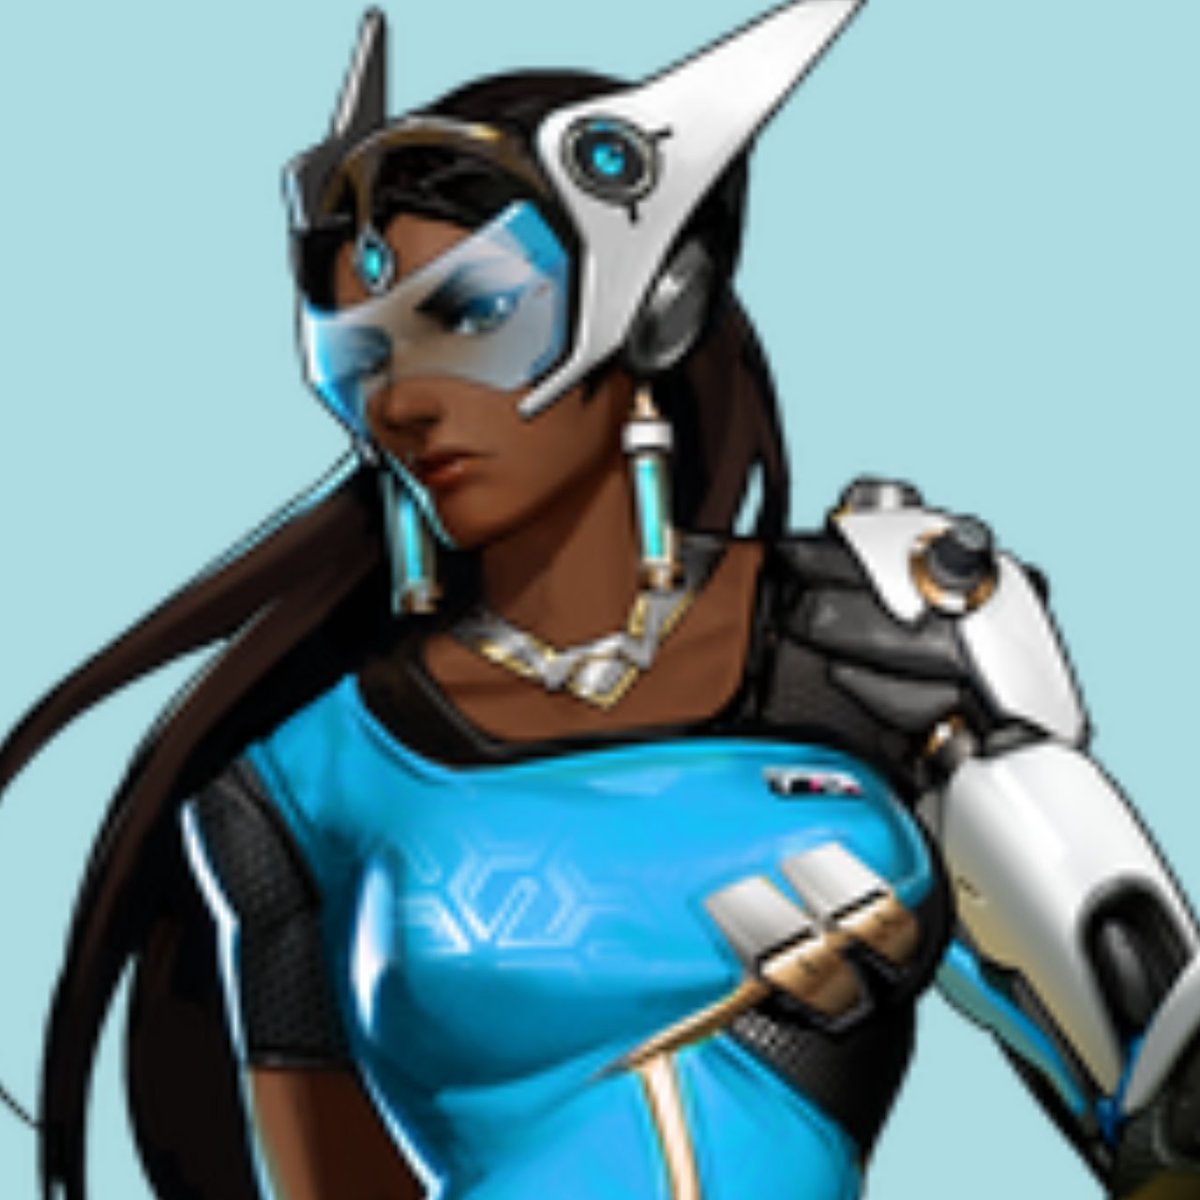 Second autistic sapphic of the day is Symmetra from Overwatch
Symmetra is an autistic lesbian
(autistic cannon, rest hc)